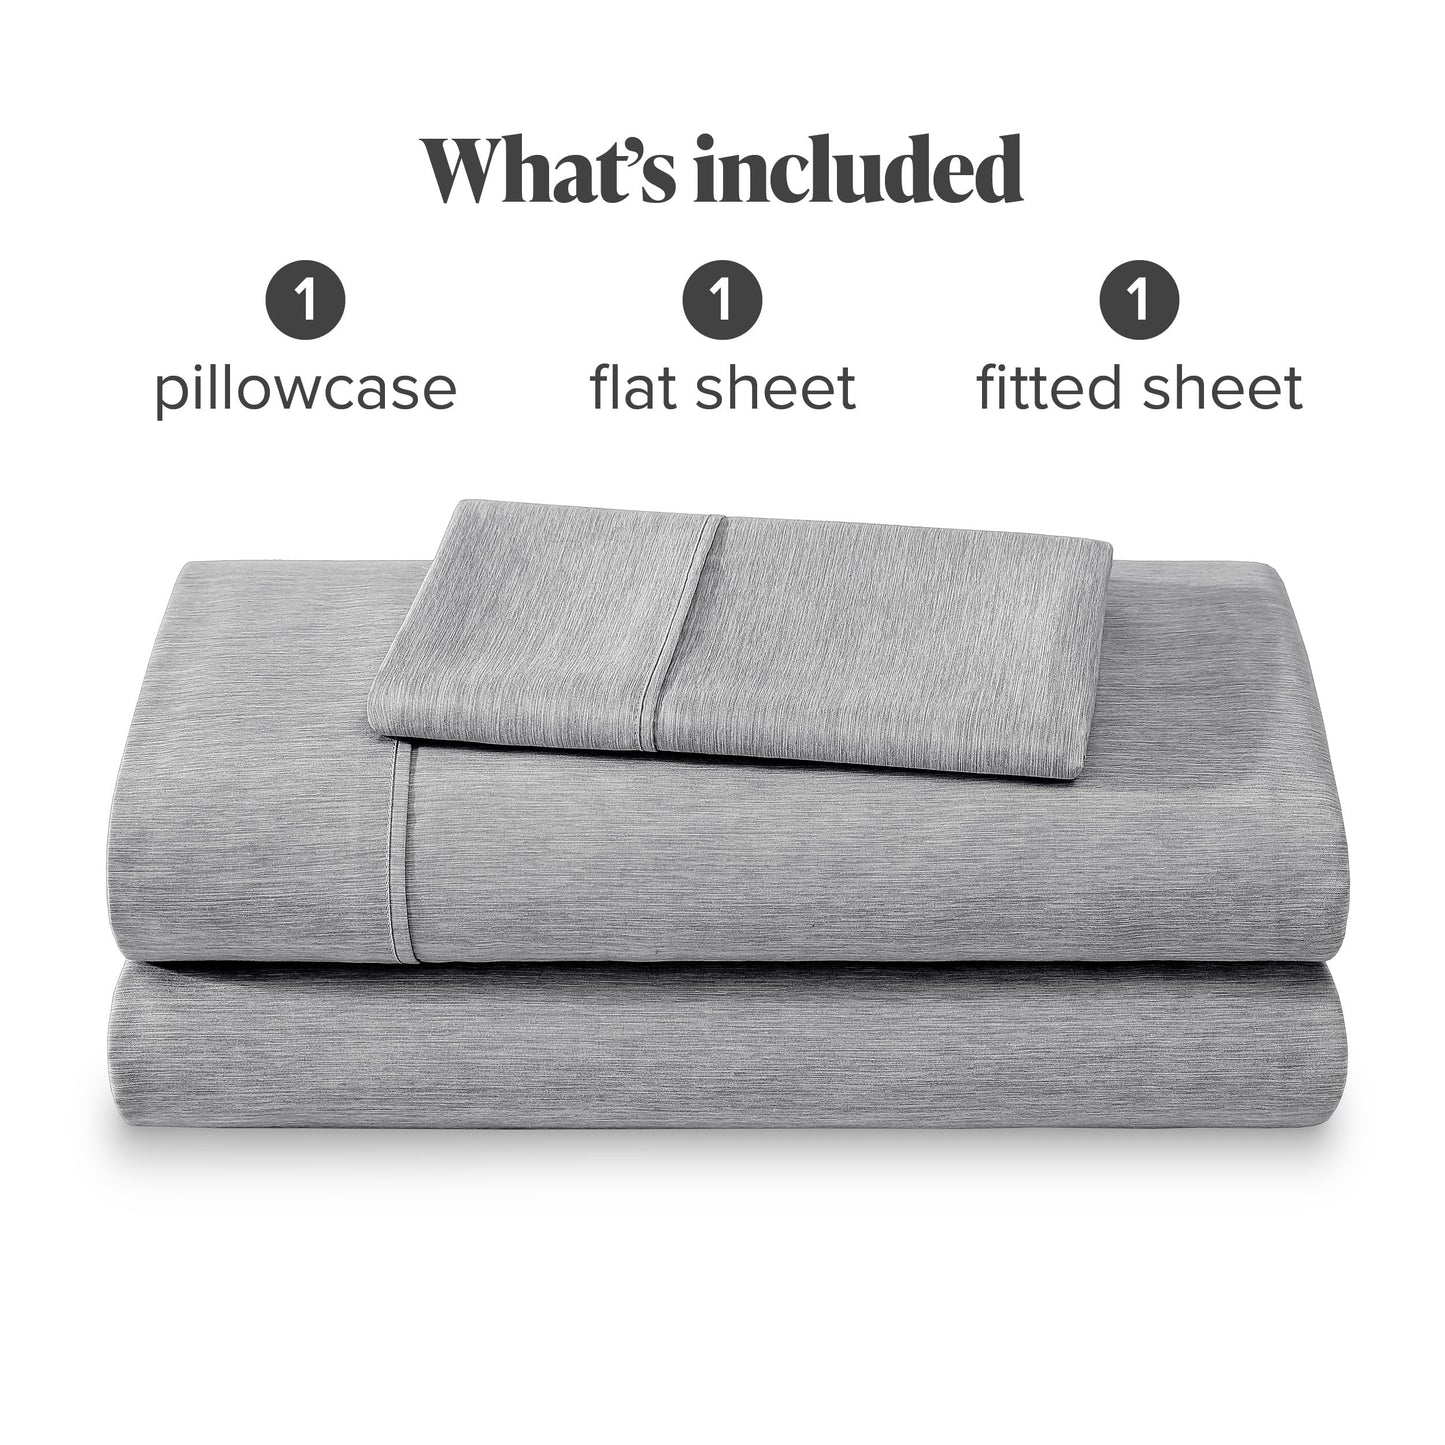 Bare Home King Sheet Set - Luxury 1800 Ultra-Soft Microfiber King Bed Sheets - Double Brushed - Deep Pockets - Easy Fit - 4 Piece Set - Bedding Sheets & Pillowcases (King, Heathered Charcoal)